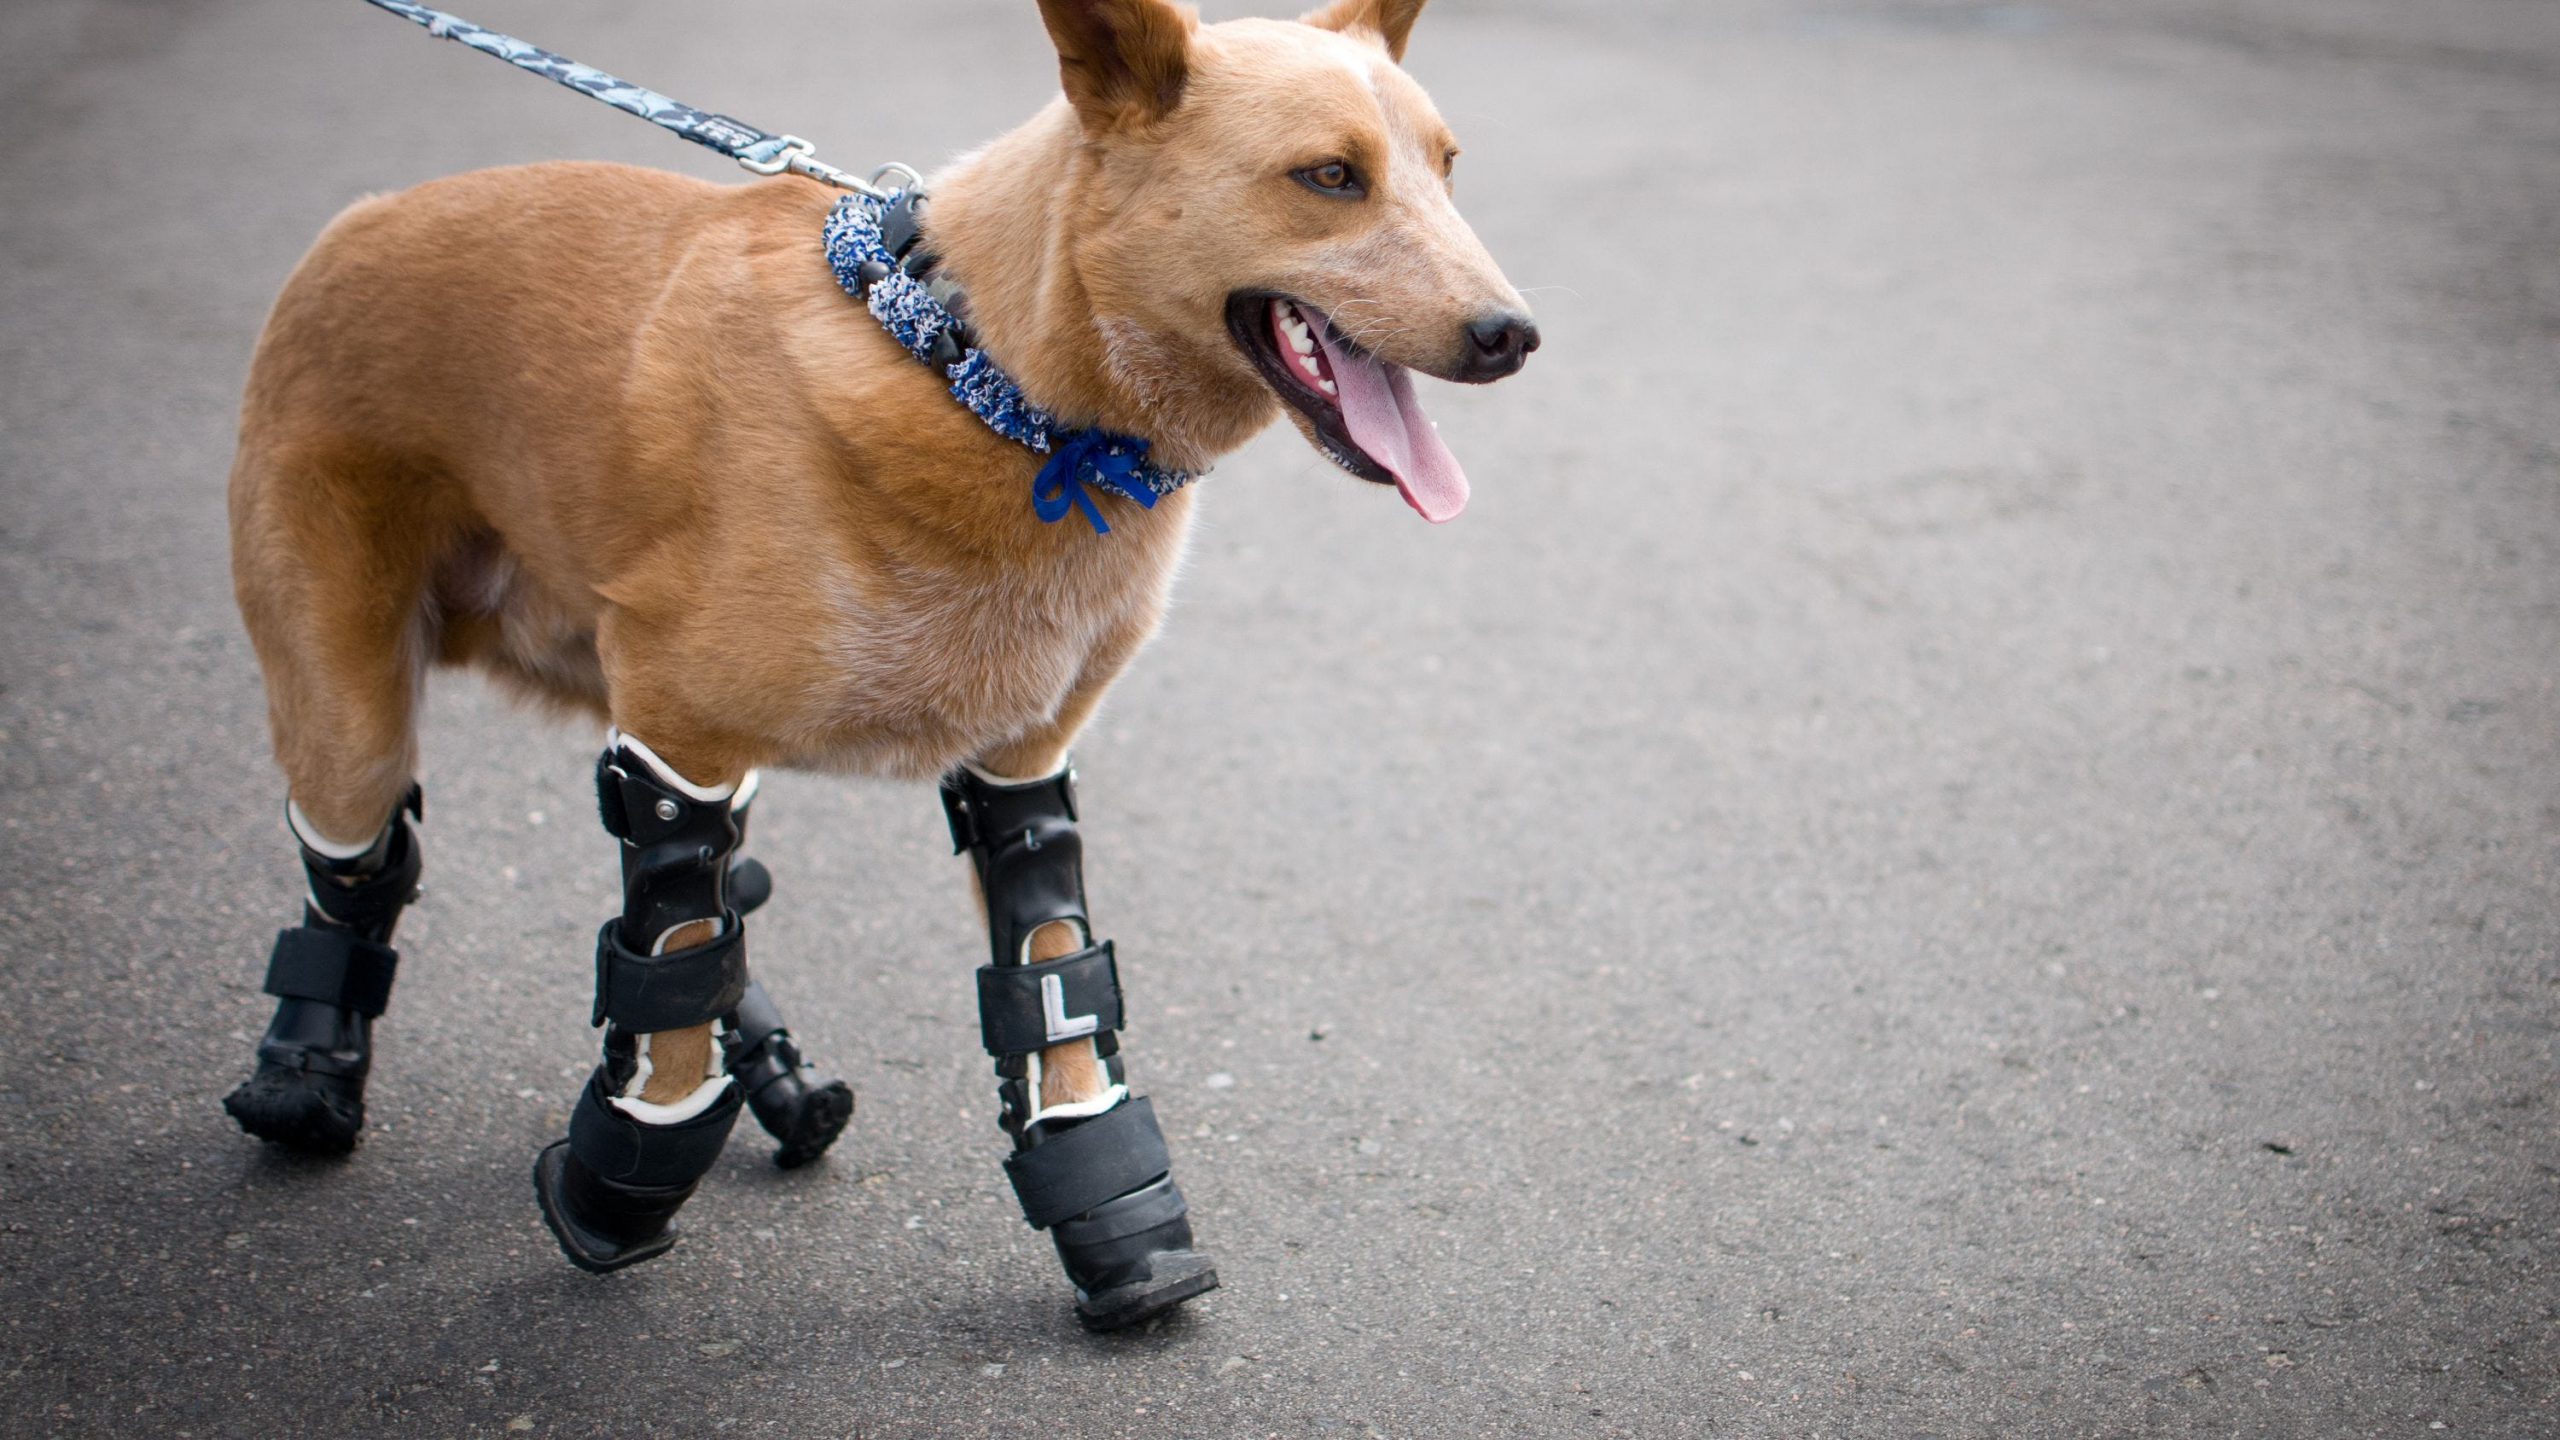 How To Make A Prosthetic Leg For A Dog